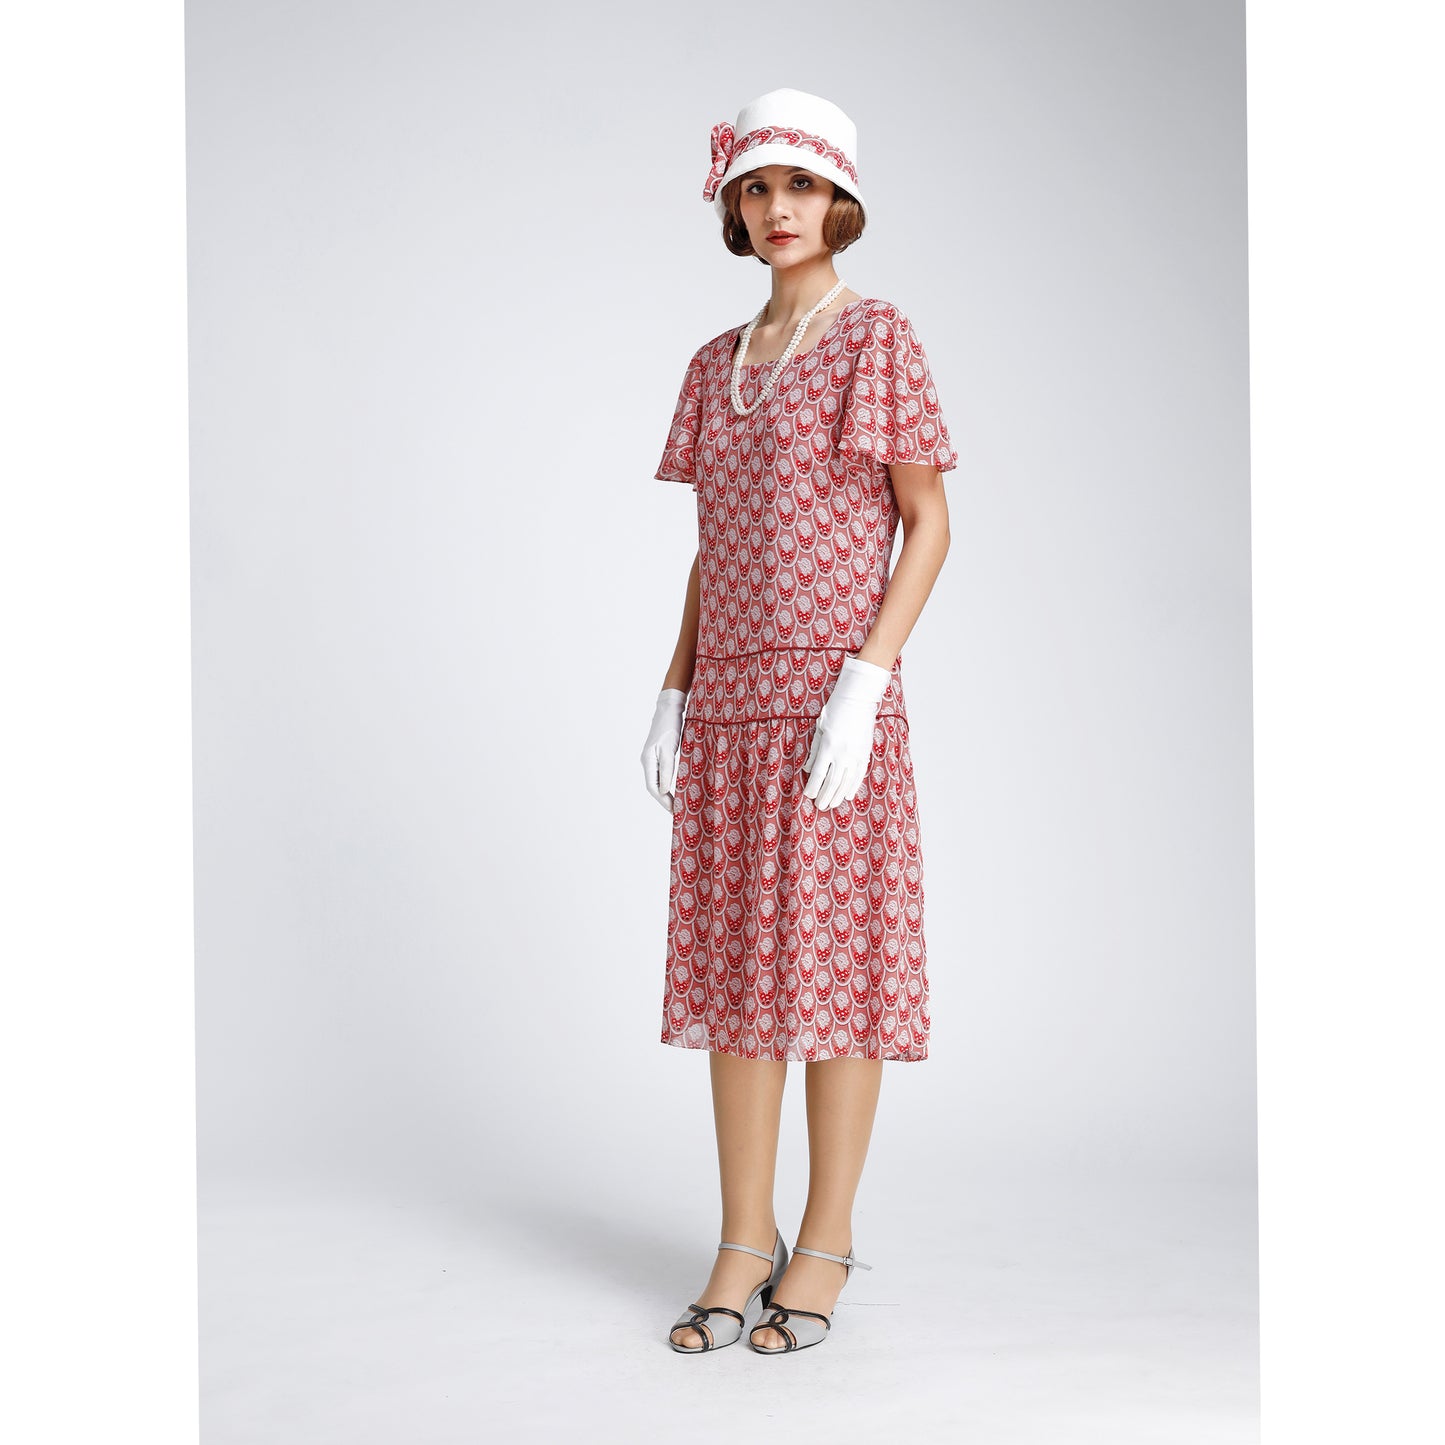 1920s cloche hat IN off-white cotton and red printed chiffon